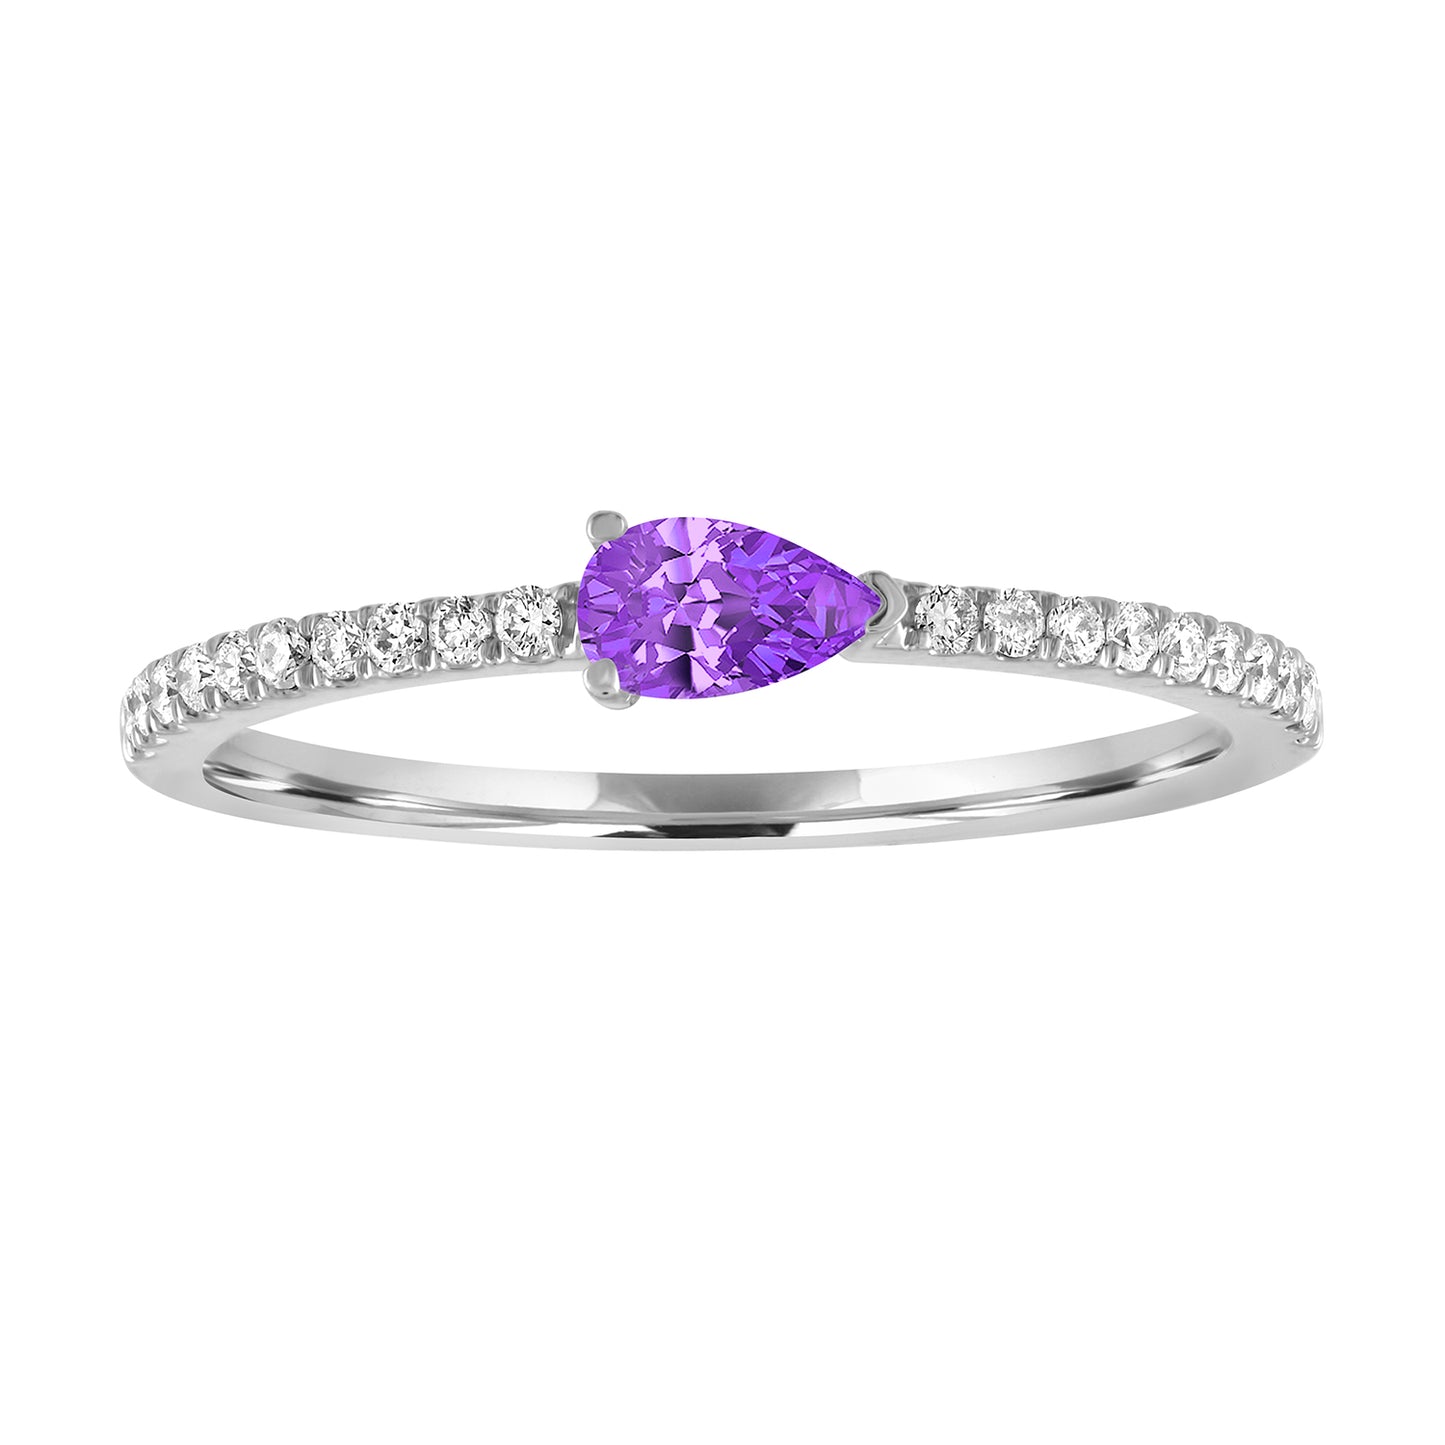 White gold skinny band with a pear shaped amethyst in the center and round diamonds on the shank. 